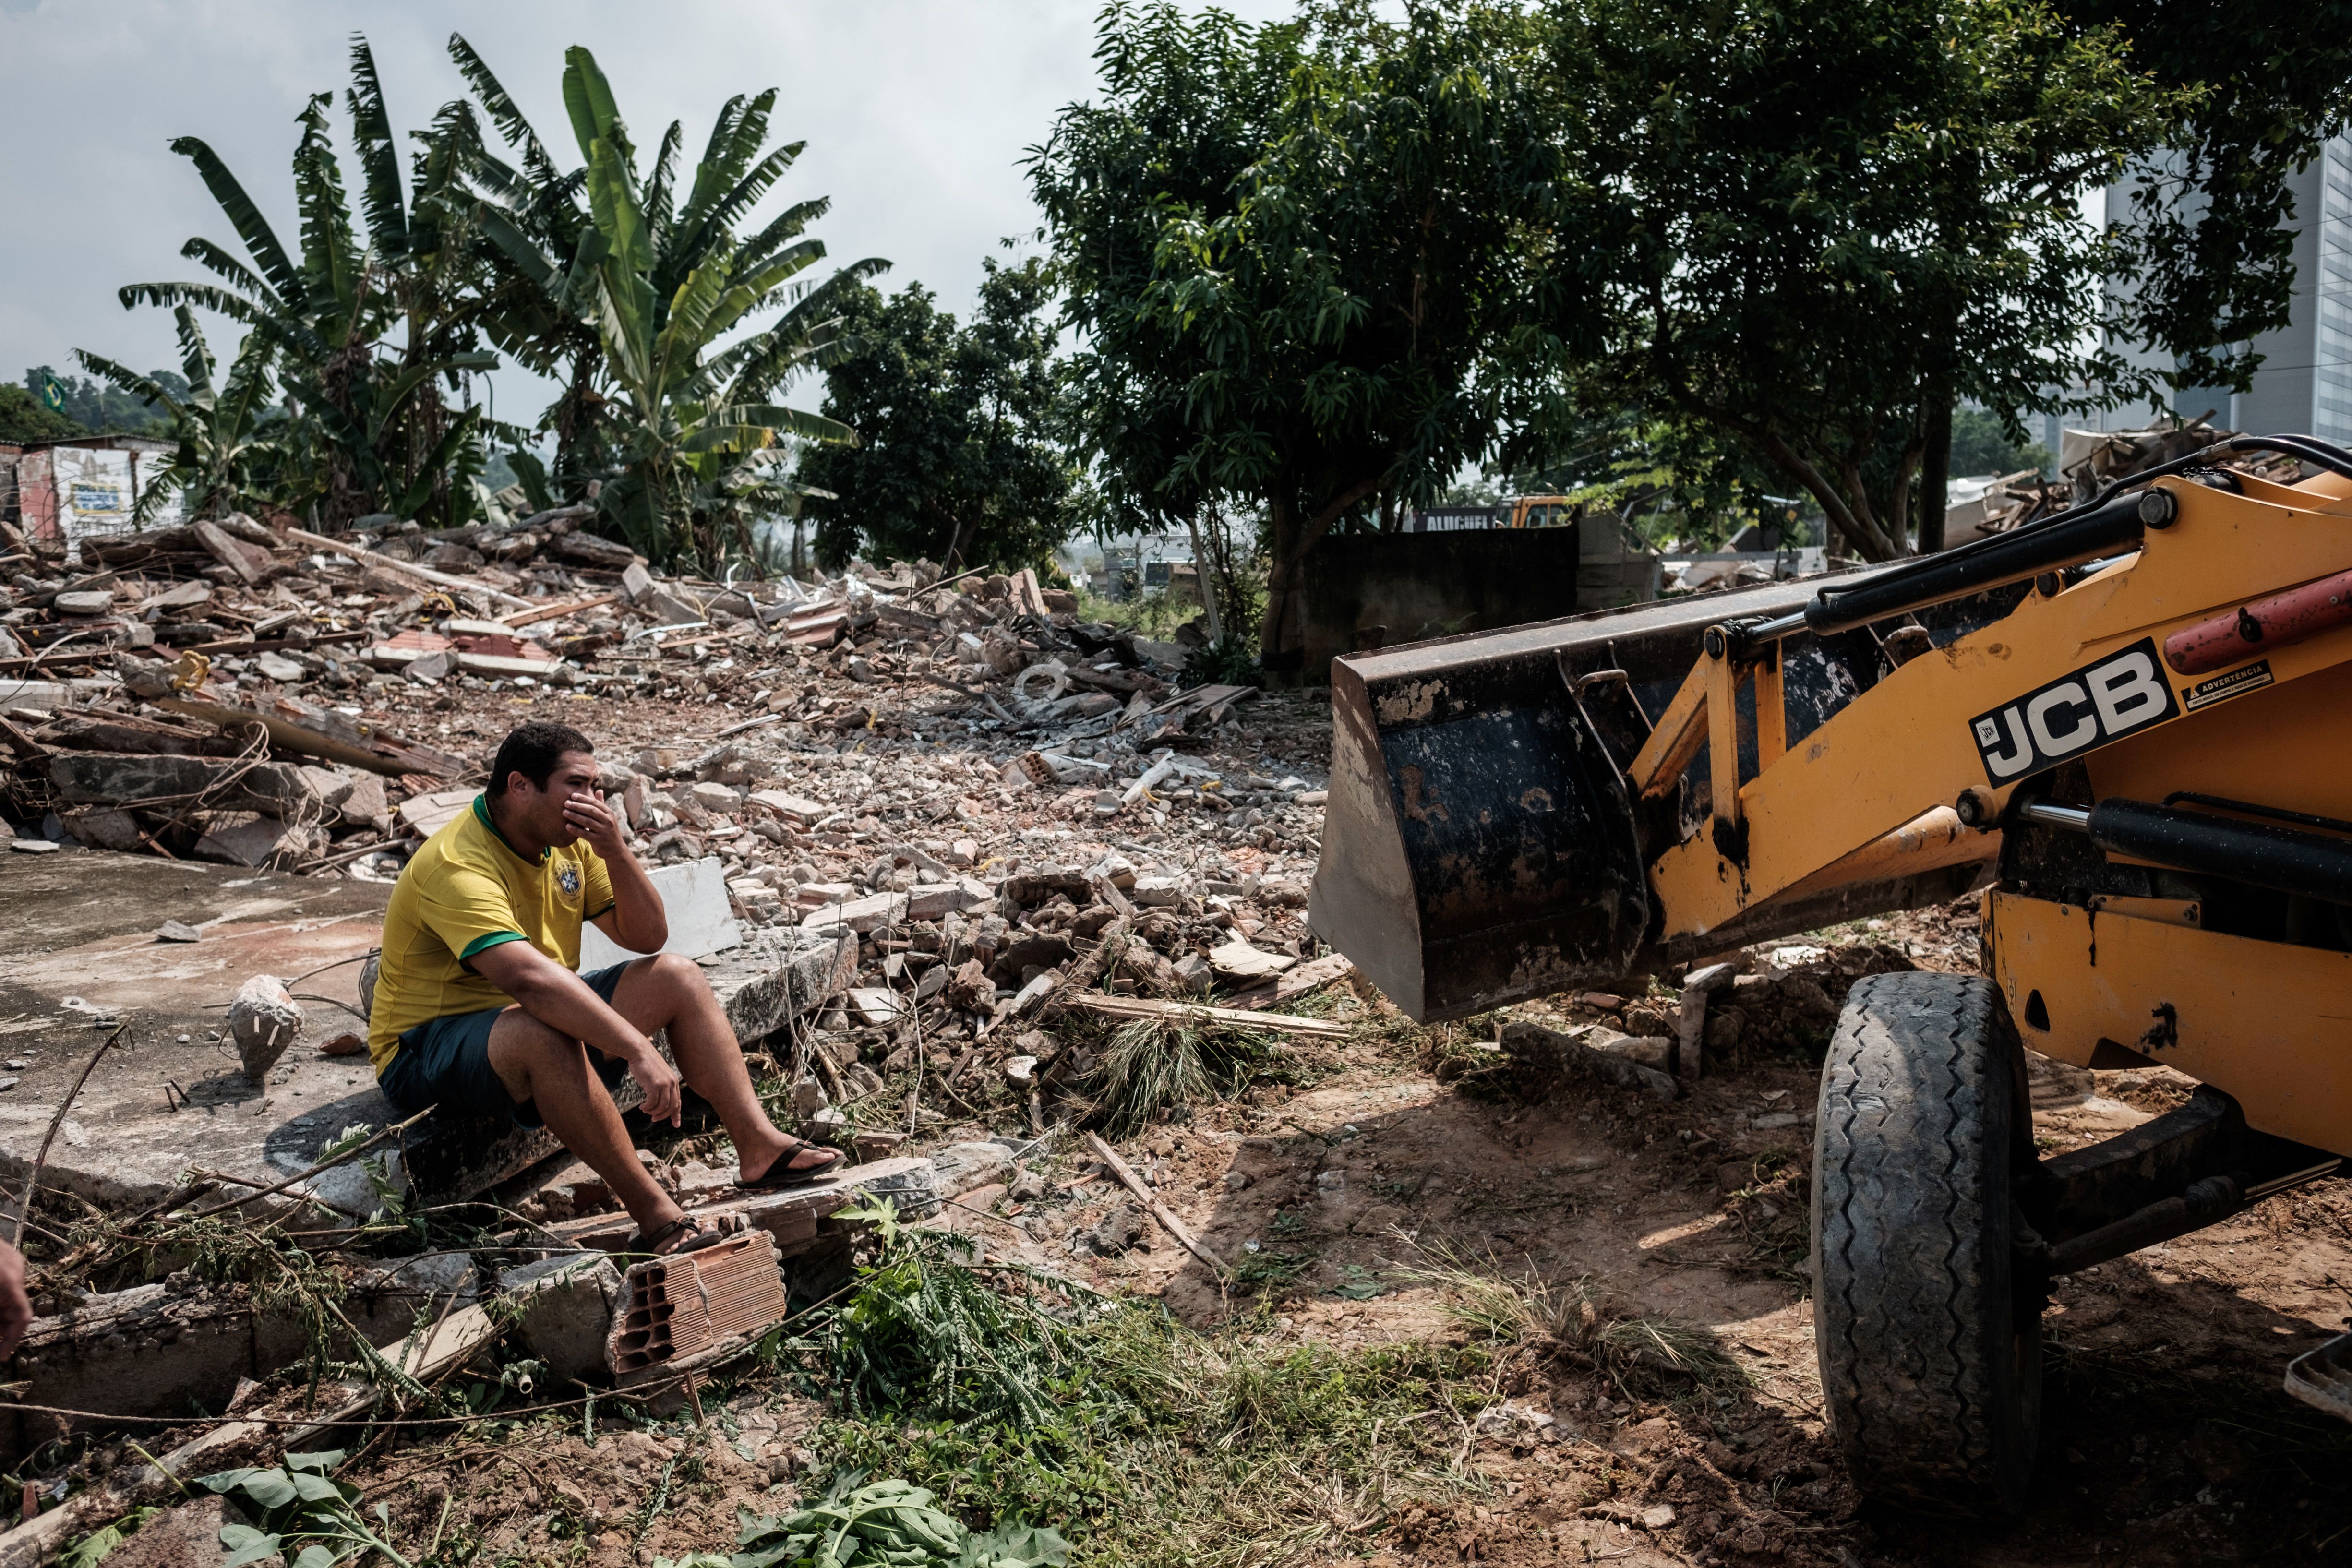 Brazilian Marcio Henrique sits on the ruins of a demolished house next door to his, at Rio de Janeiro's Vila Autodromo neighbourhood, near the construction site of the Olympic Park for the Rio 2016 Olympic Games, on March 8, 2016. Some families have refused to move out until they receive an eviction order by the municipal authorities. A passage connecting the Olympic Park and the Athletes Village is planned to be built on the site. AFP PHOTO / YASUYOSHI CHIBA / AFP / YASUYOSHI CHIBA (Photo credit should read YASUYOSHI CHIBA/AFP/Getty Images)